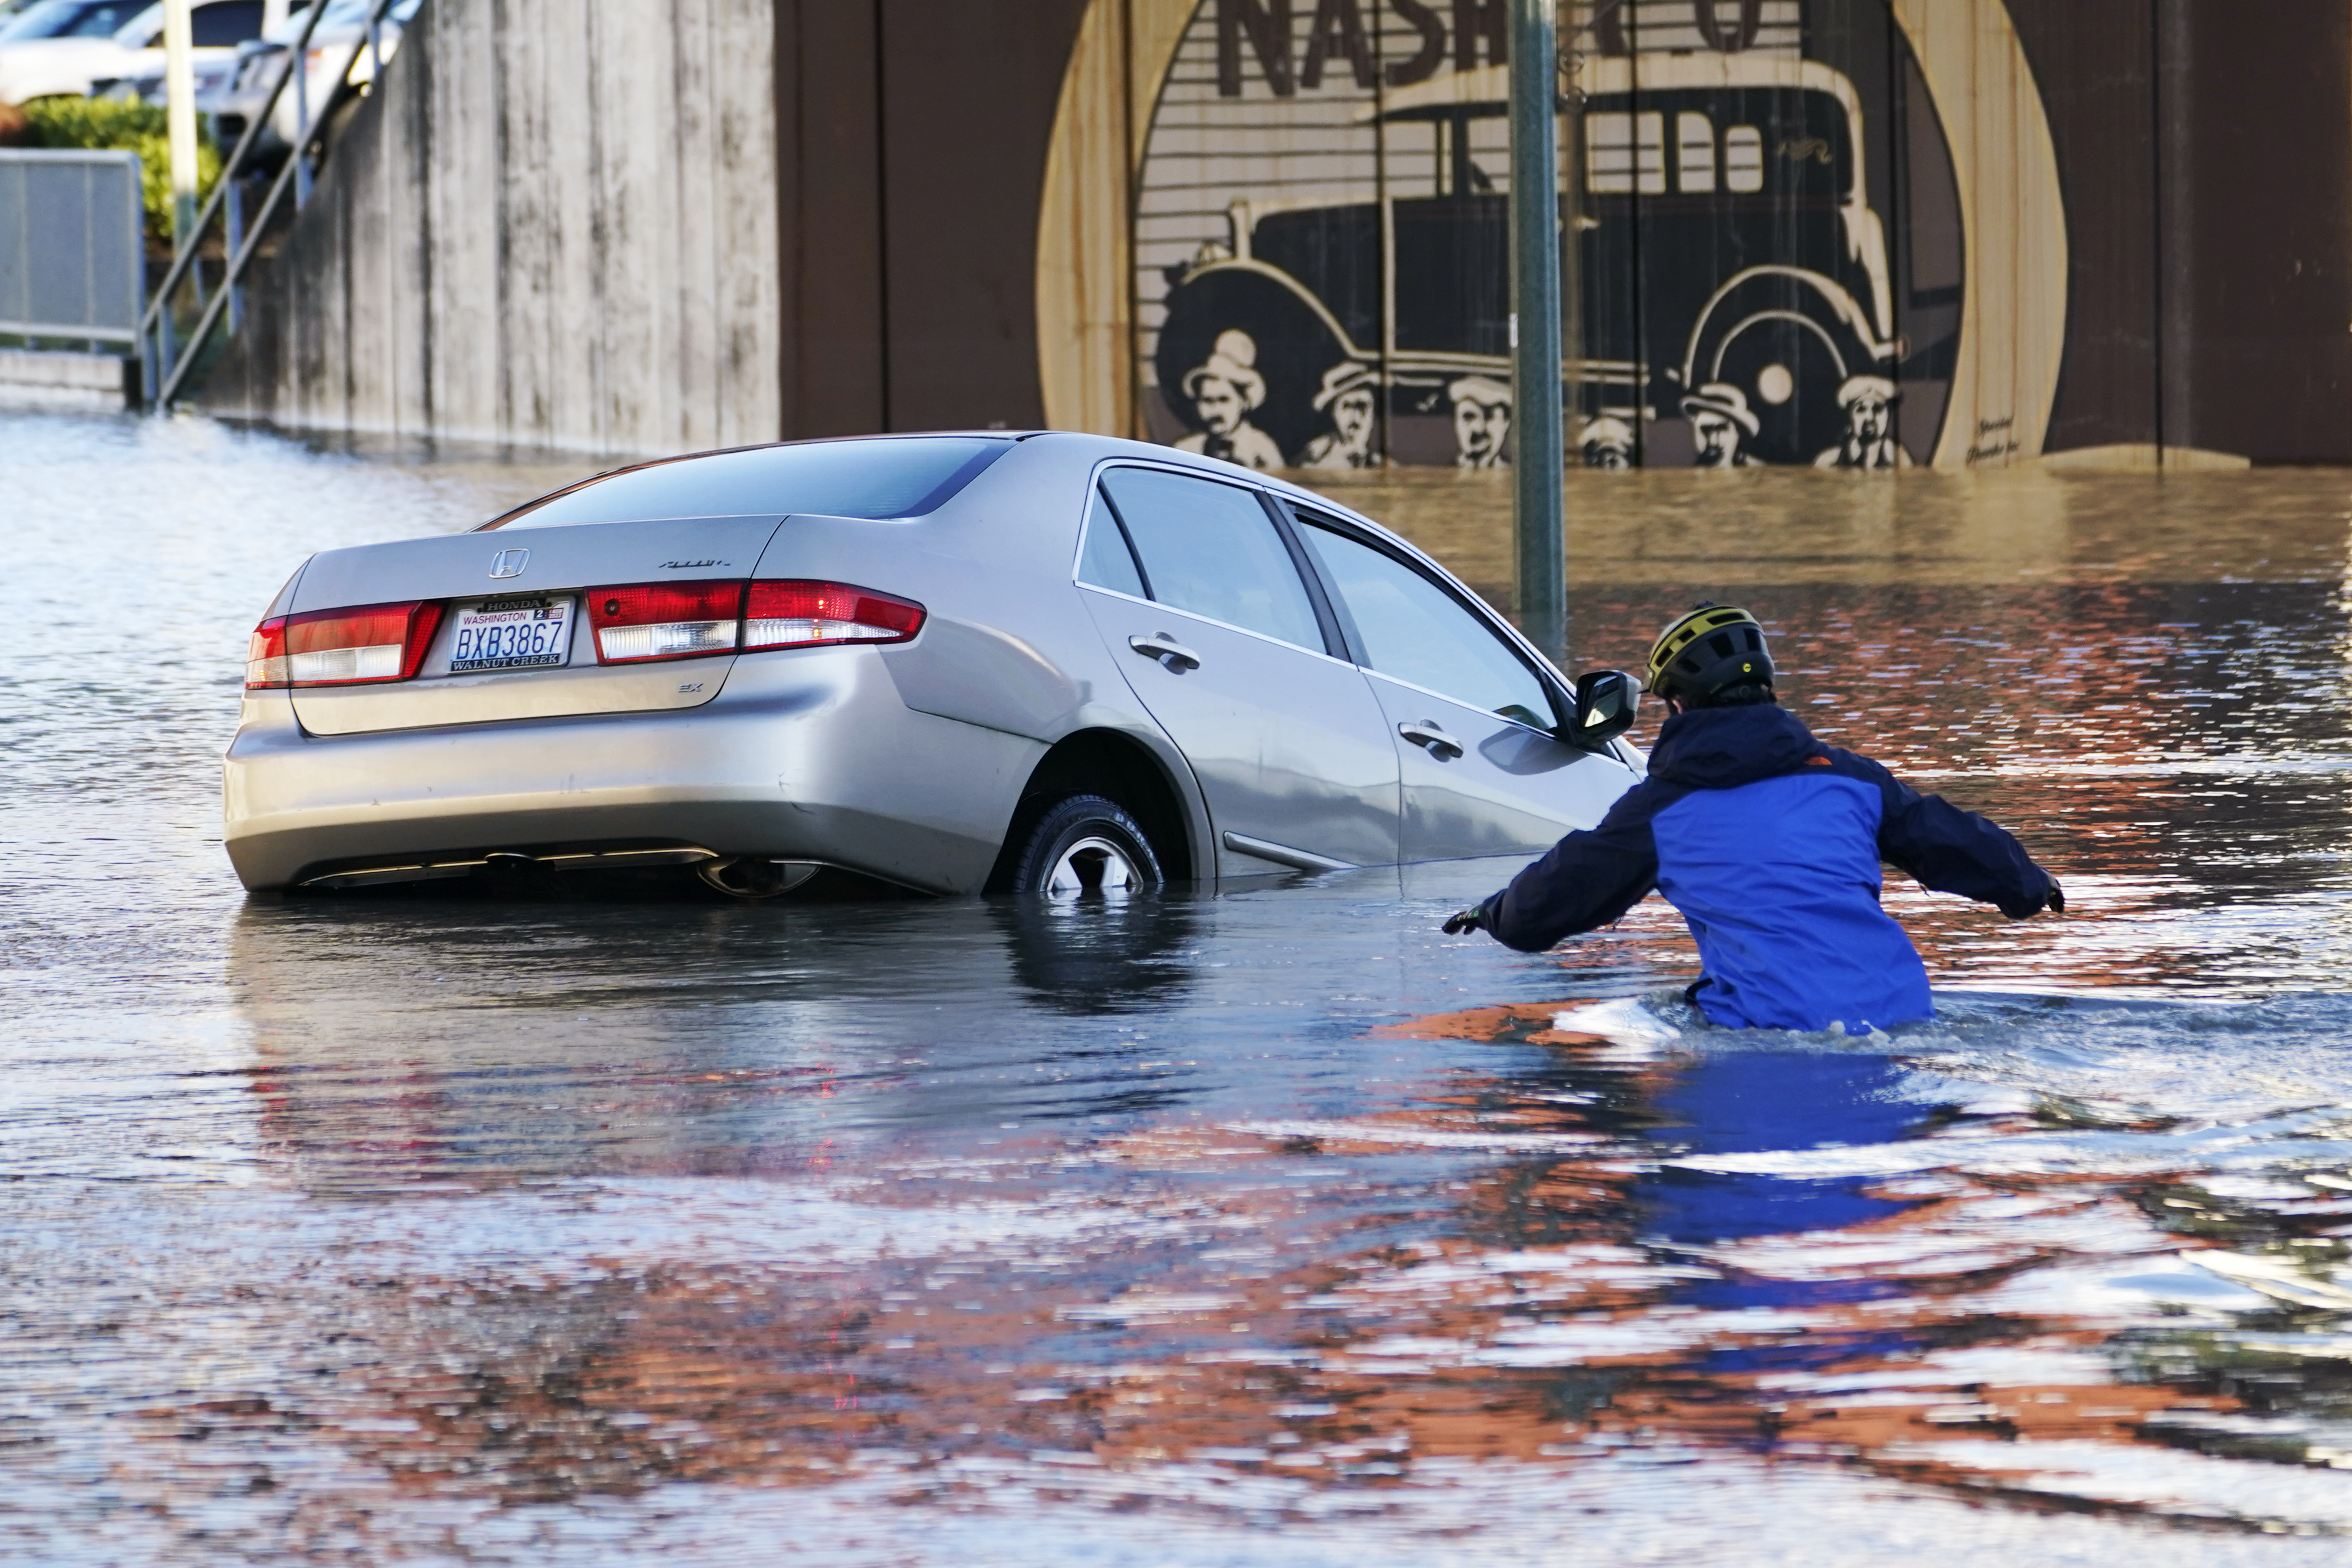 A man wades into the water to help rescue a flooded car in the Nooksack River in Ferndale, Washington.